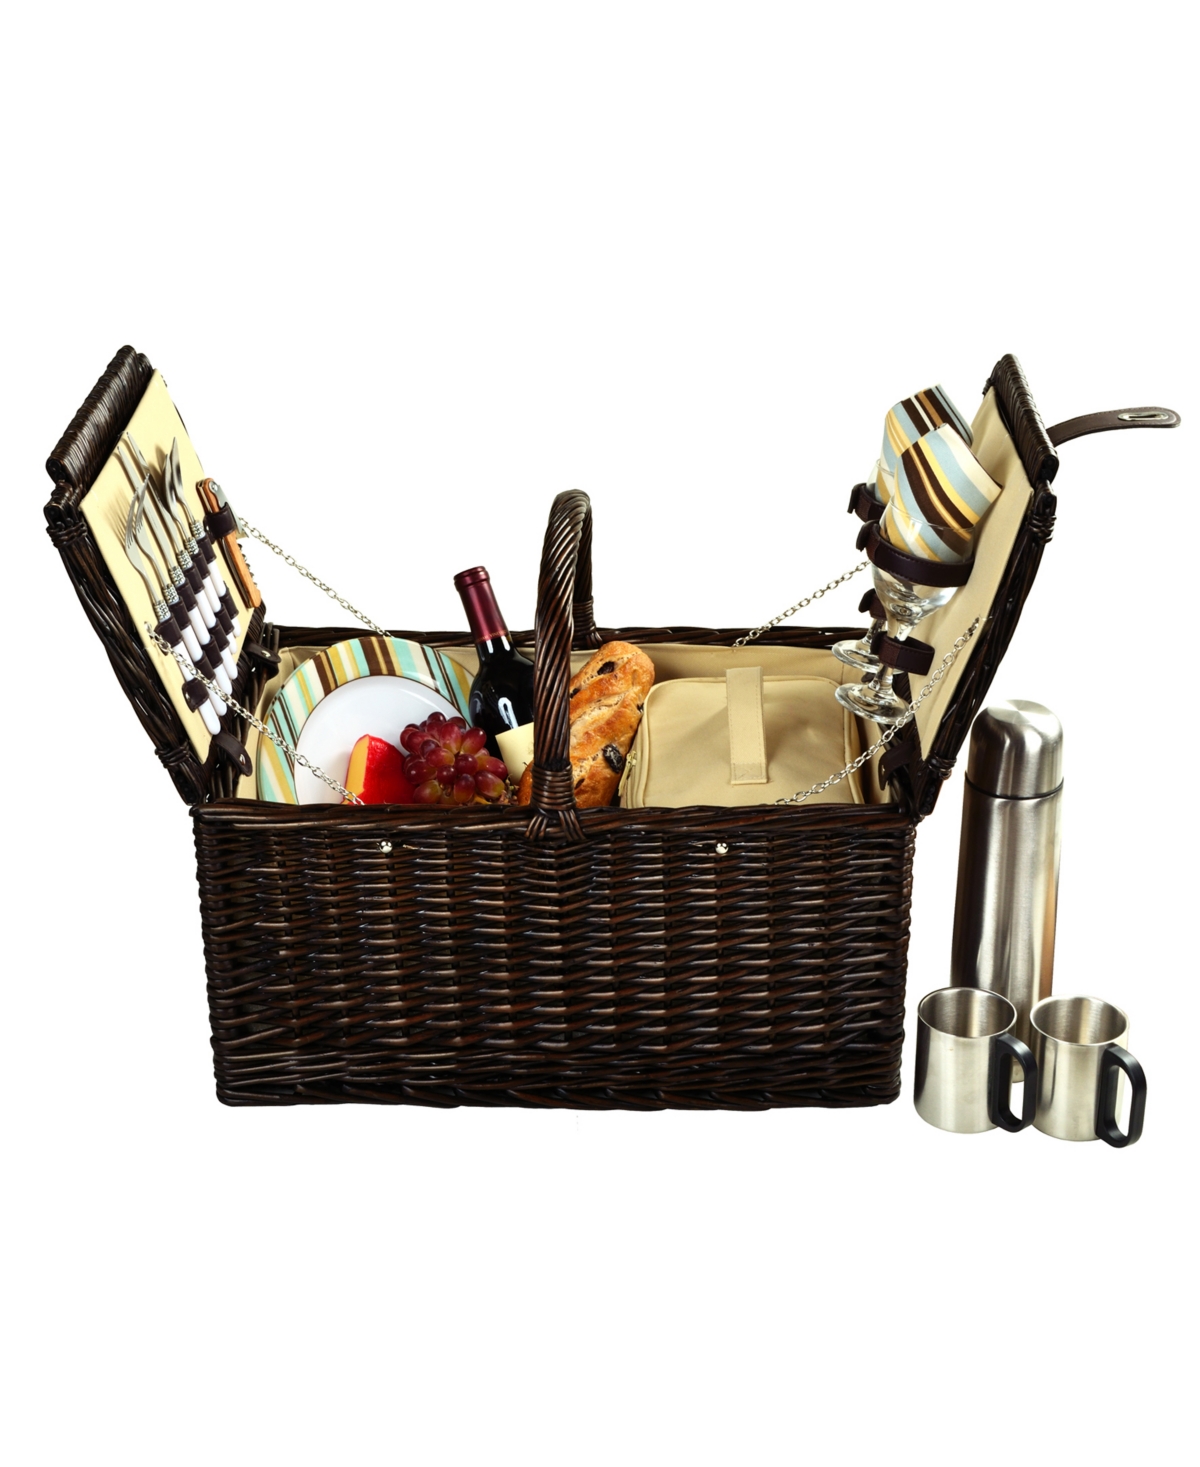 Surrey Willow Picnic Basket with Coffee Set -Service for 2 - Orange